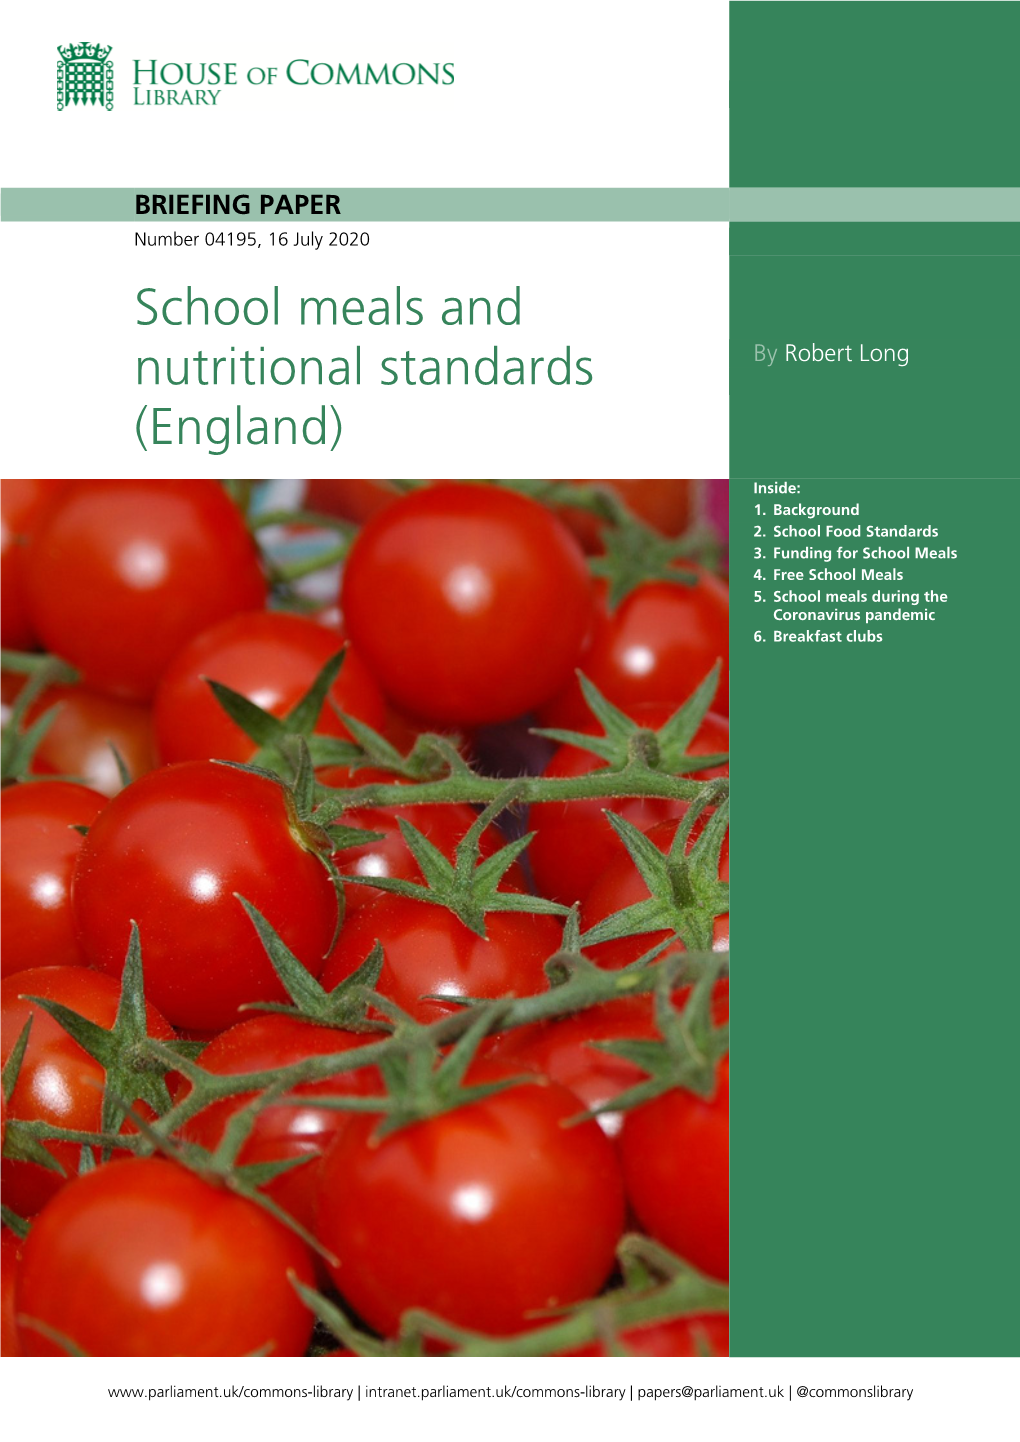 School Meals and Nutritional Standards (England)